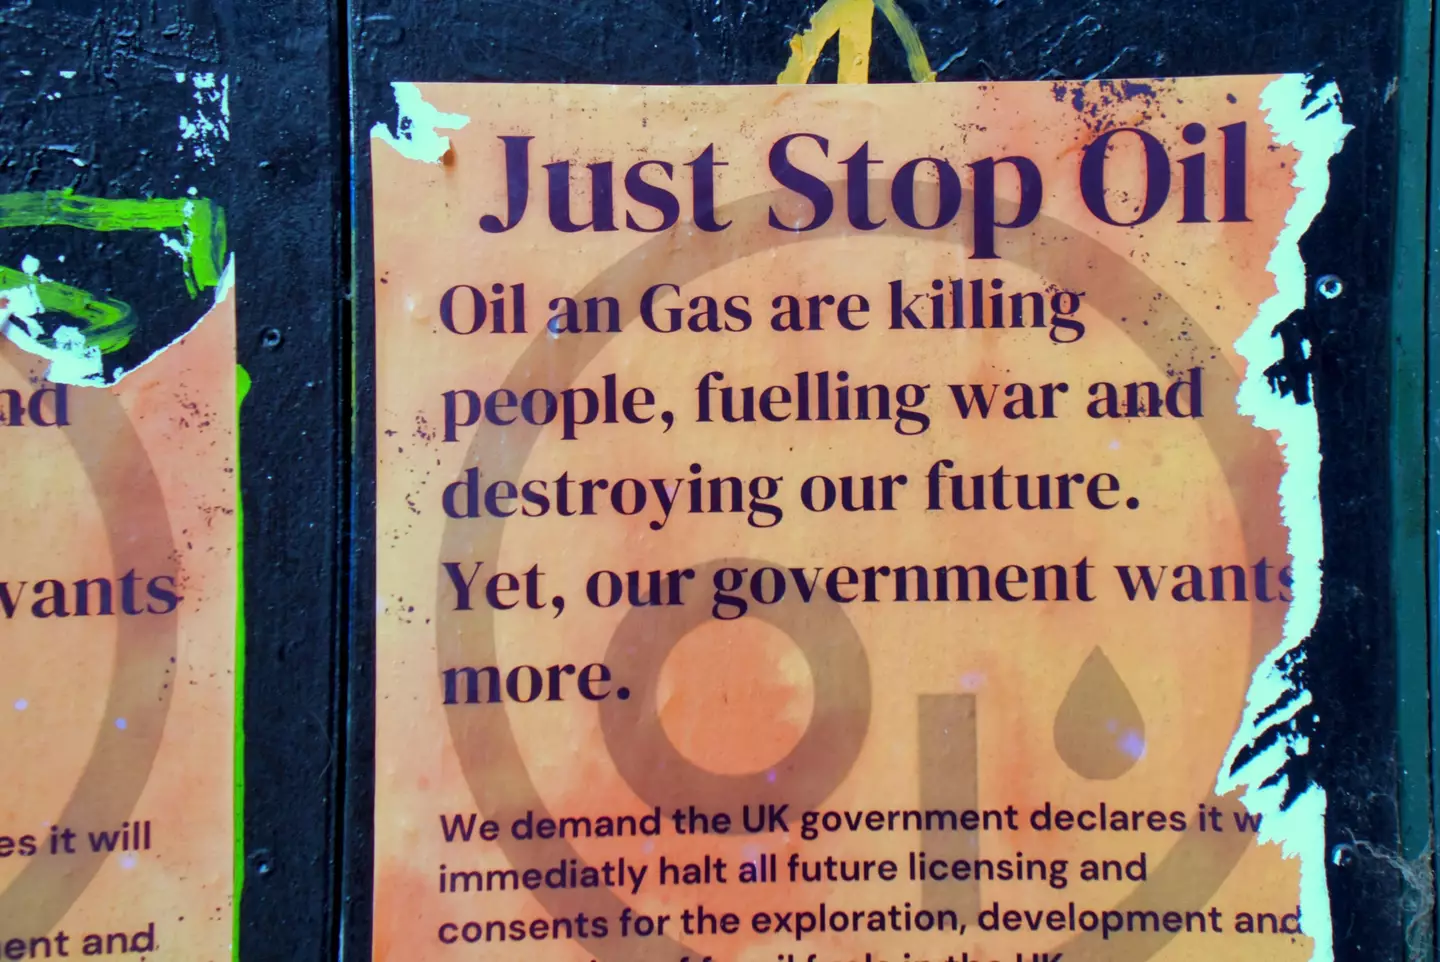 Just Stop Oil have divided opinion over their protest methods.